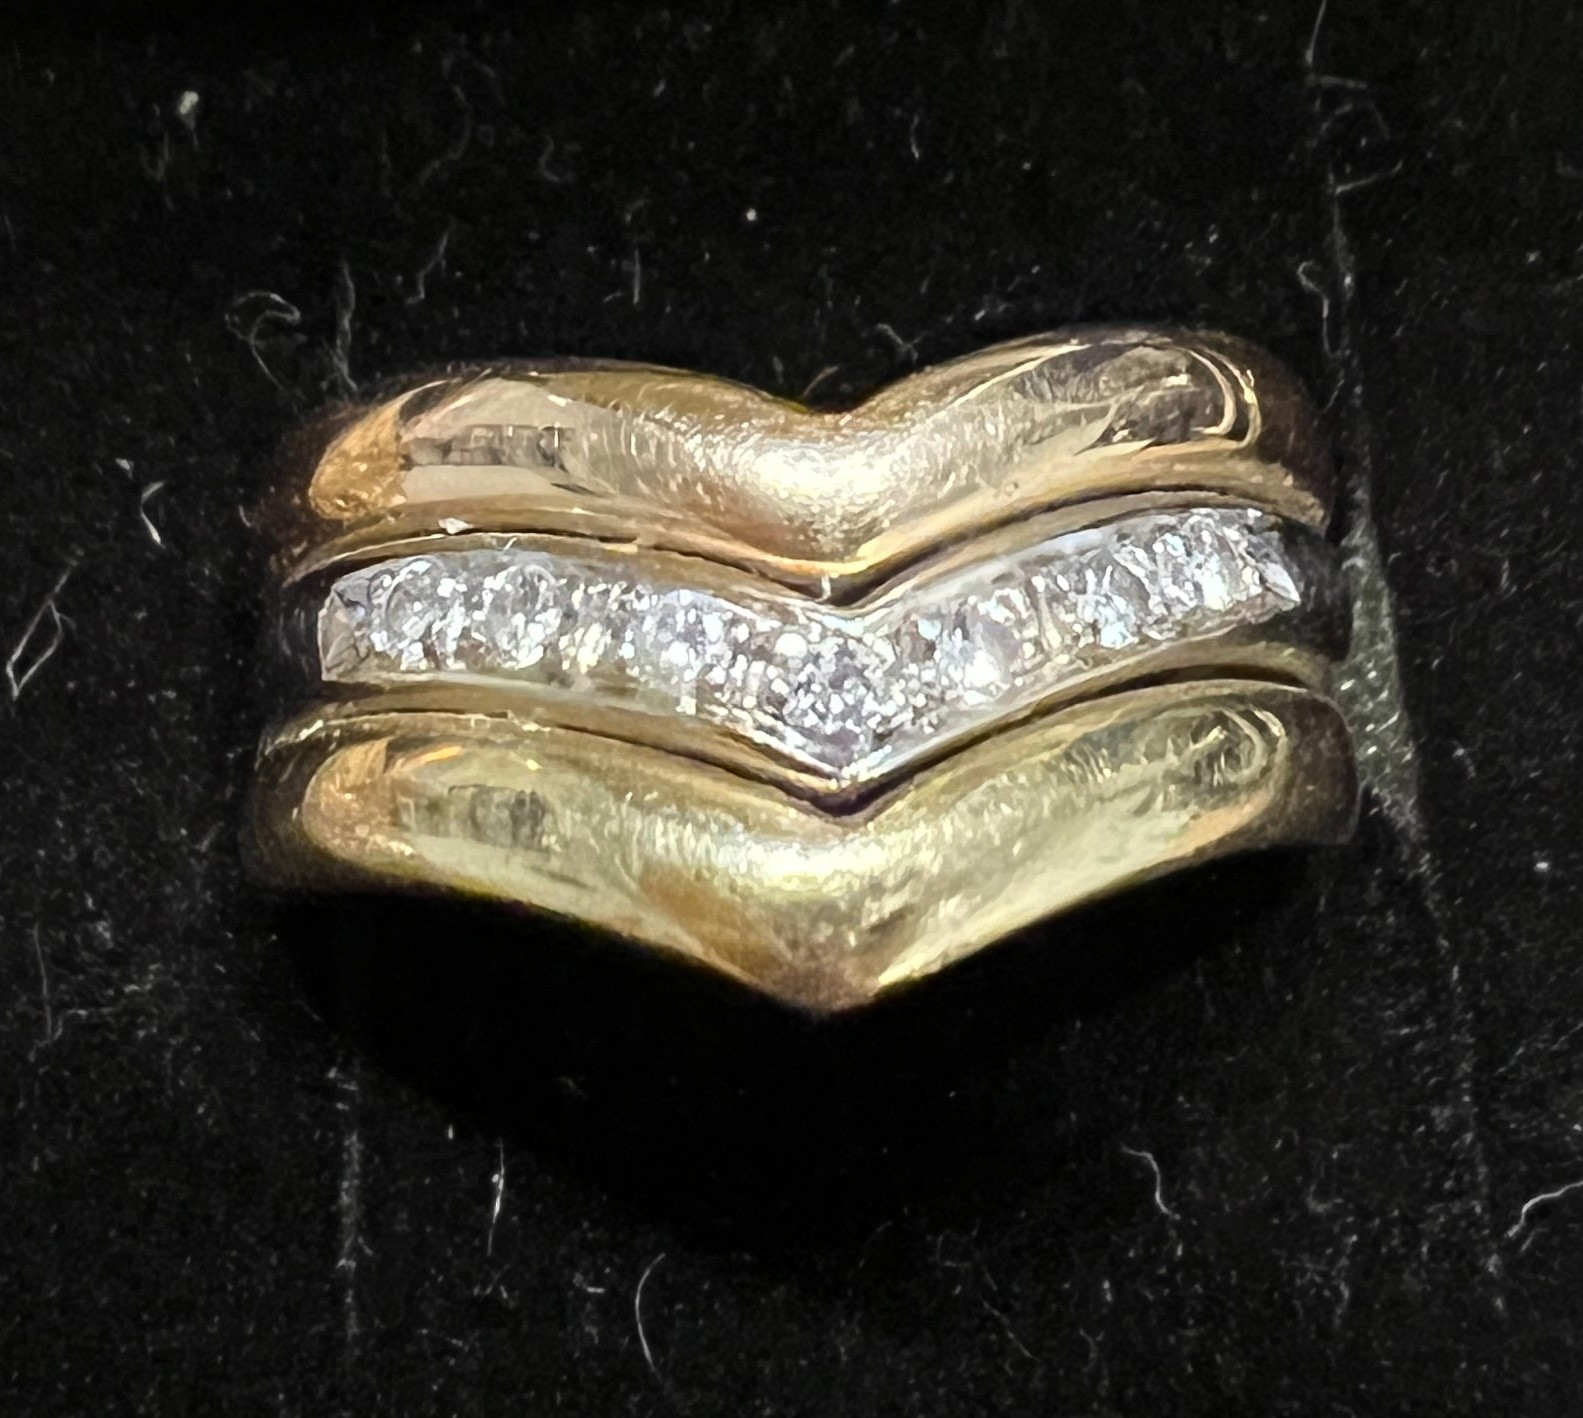 A 18 carat white and yellow gold ring set with a v shaped band of diamonds. Weight 5.3gm. Size M.